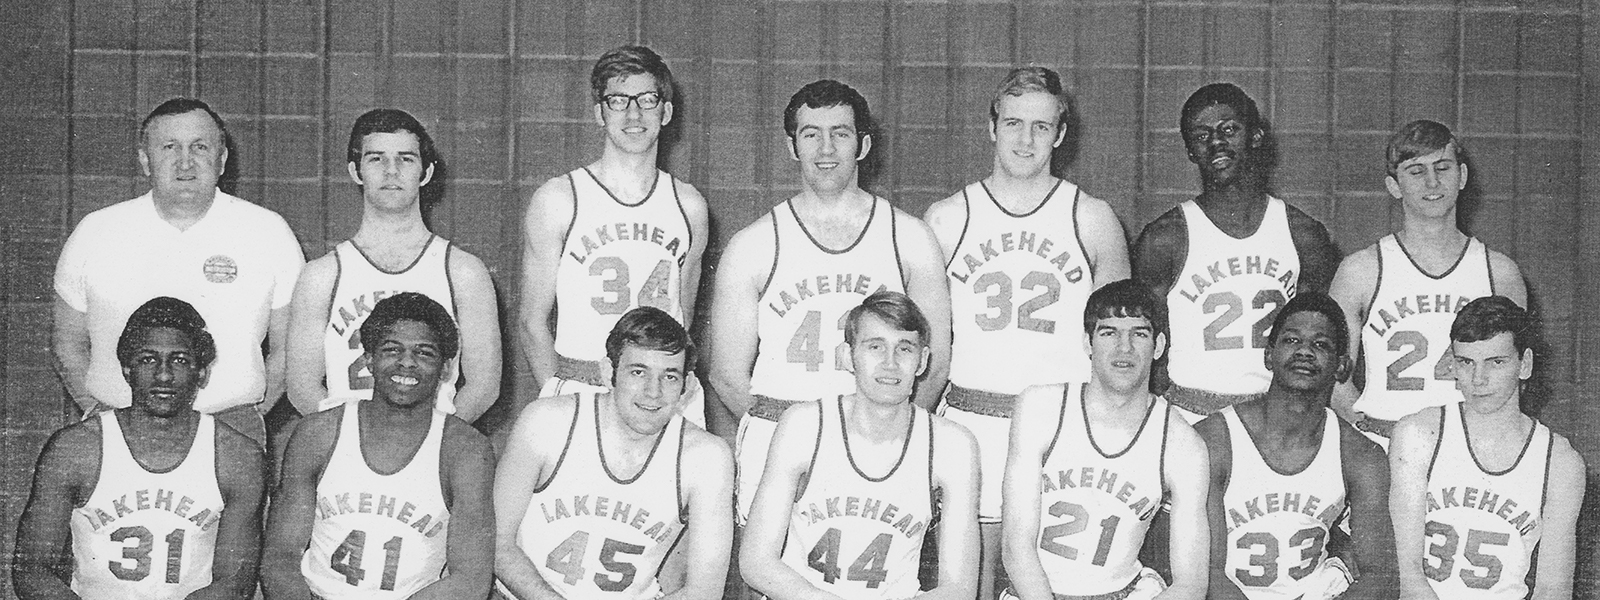 A shot of the 1969-70 basketball team